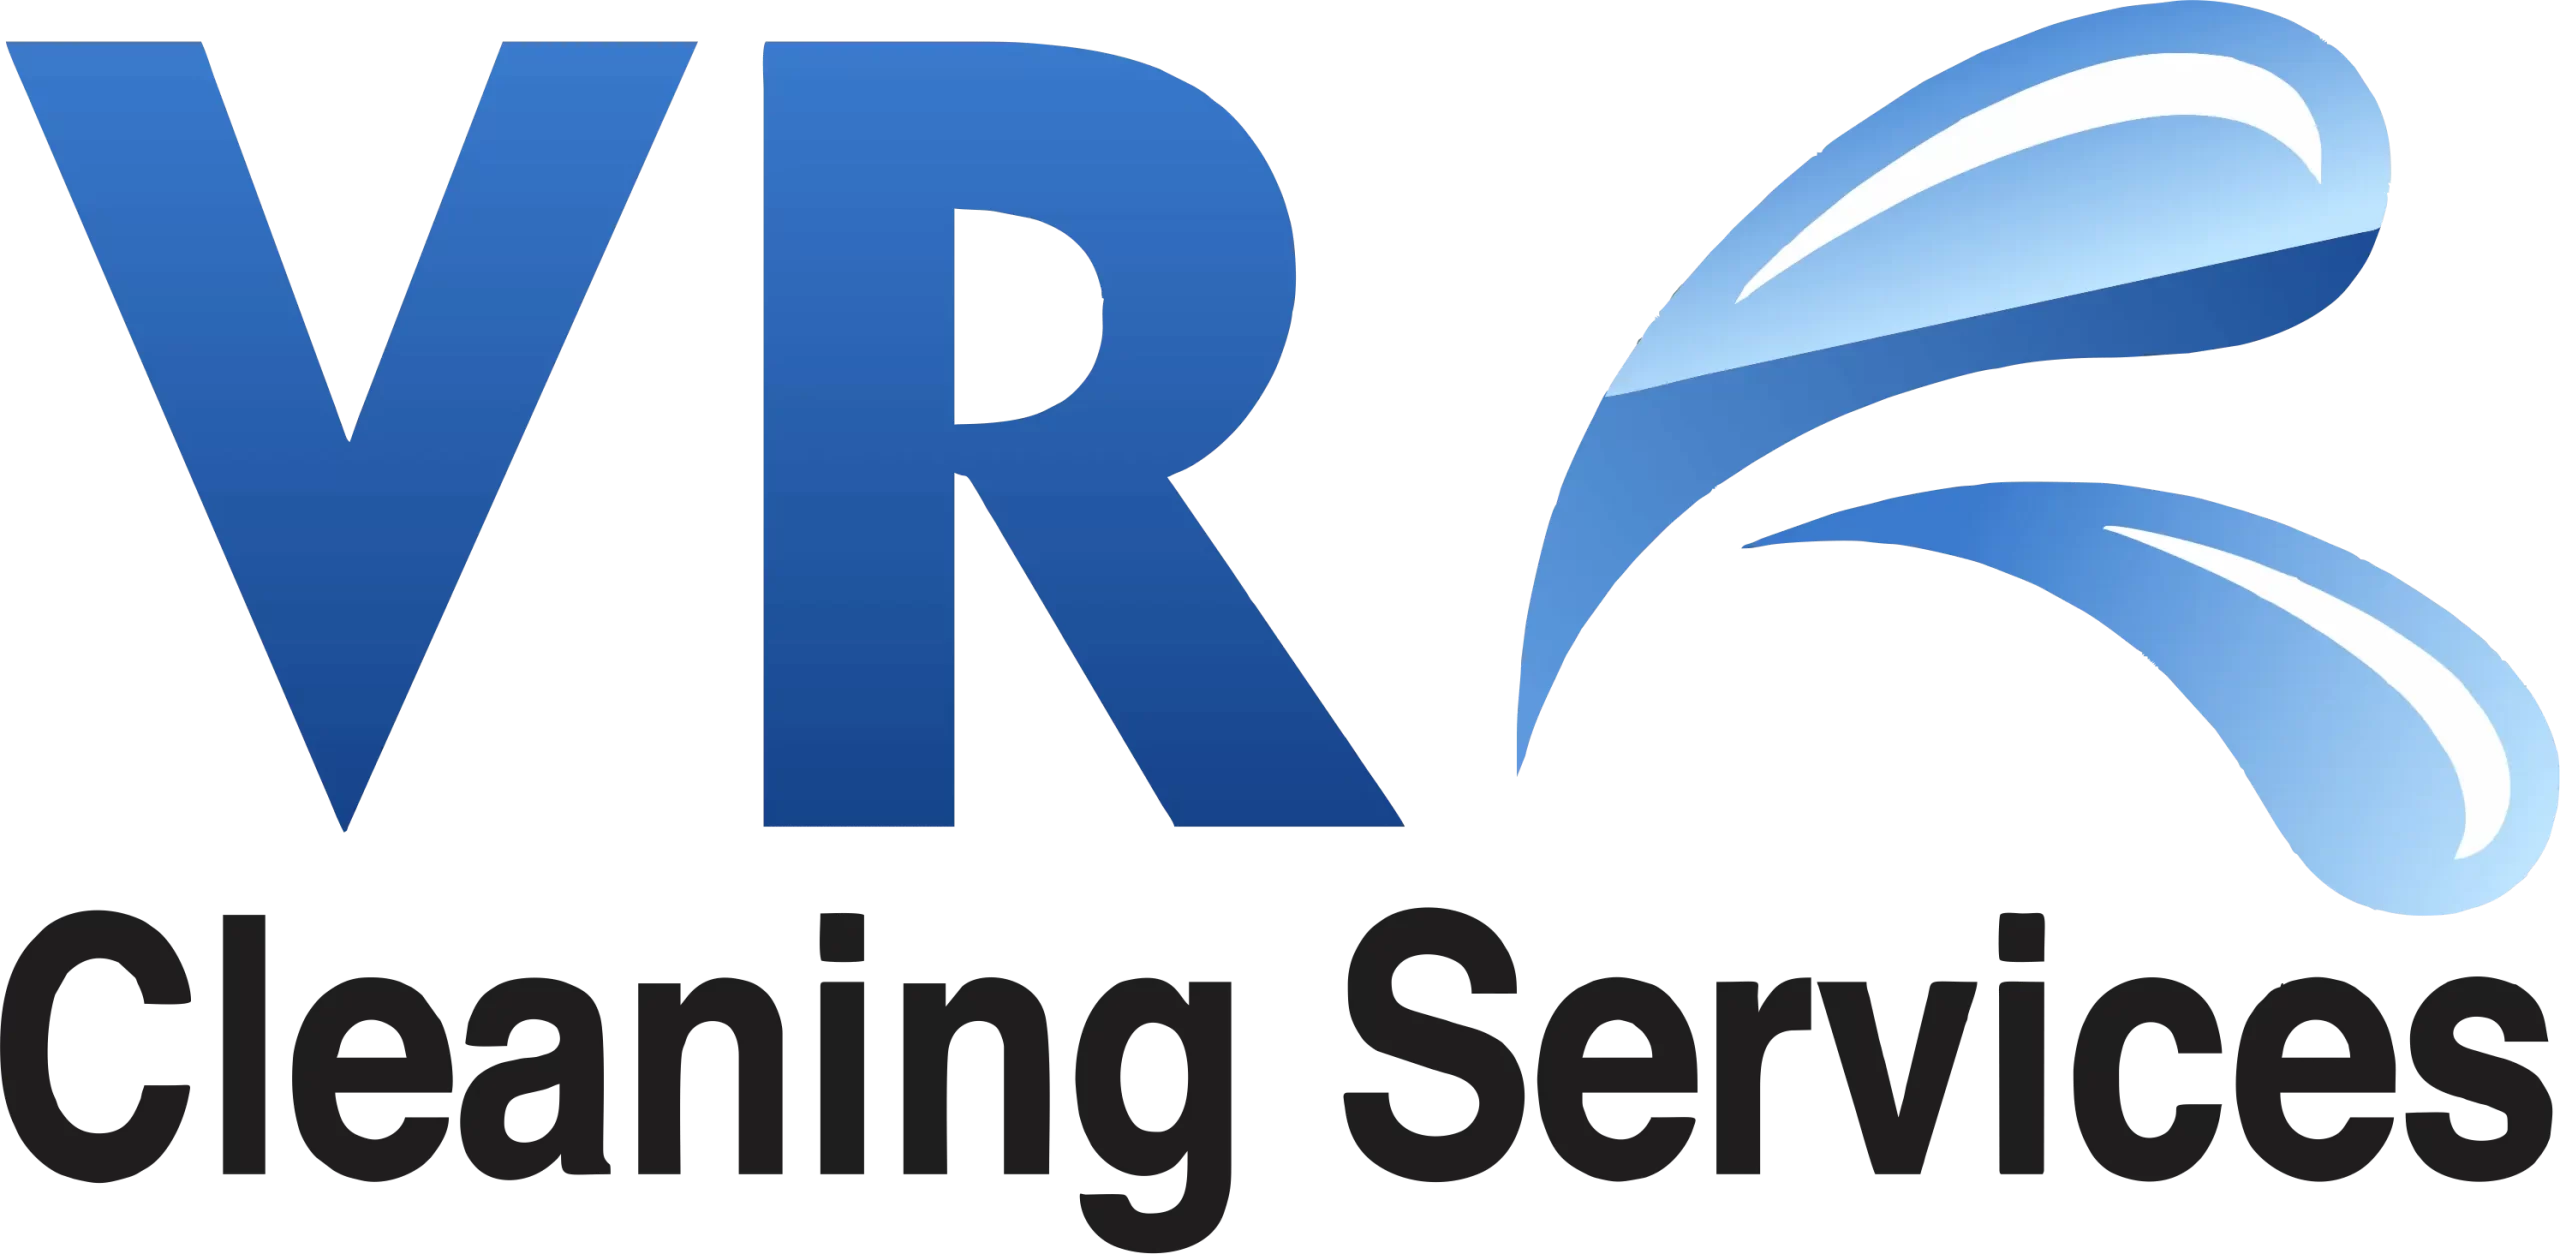 Vr cleaning services